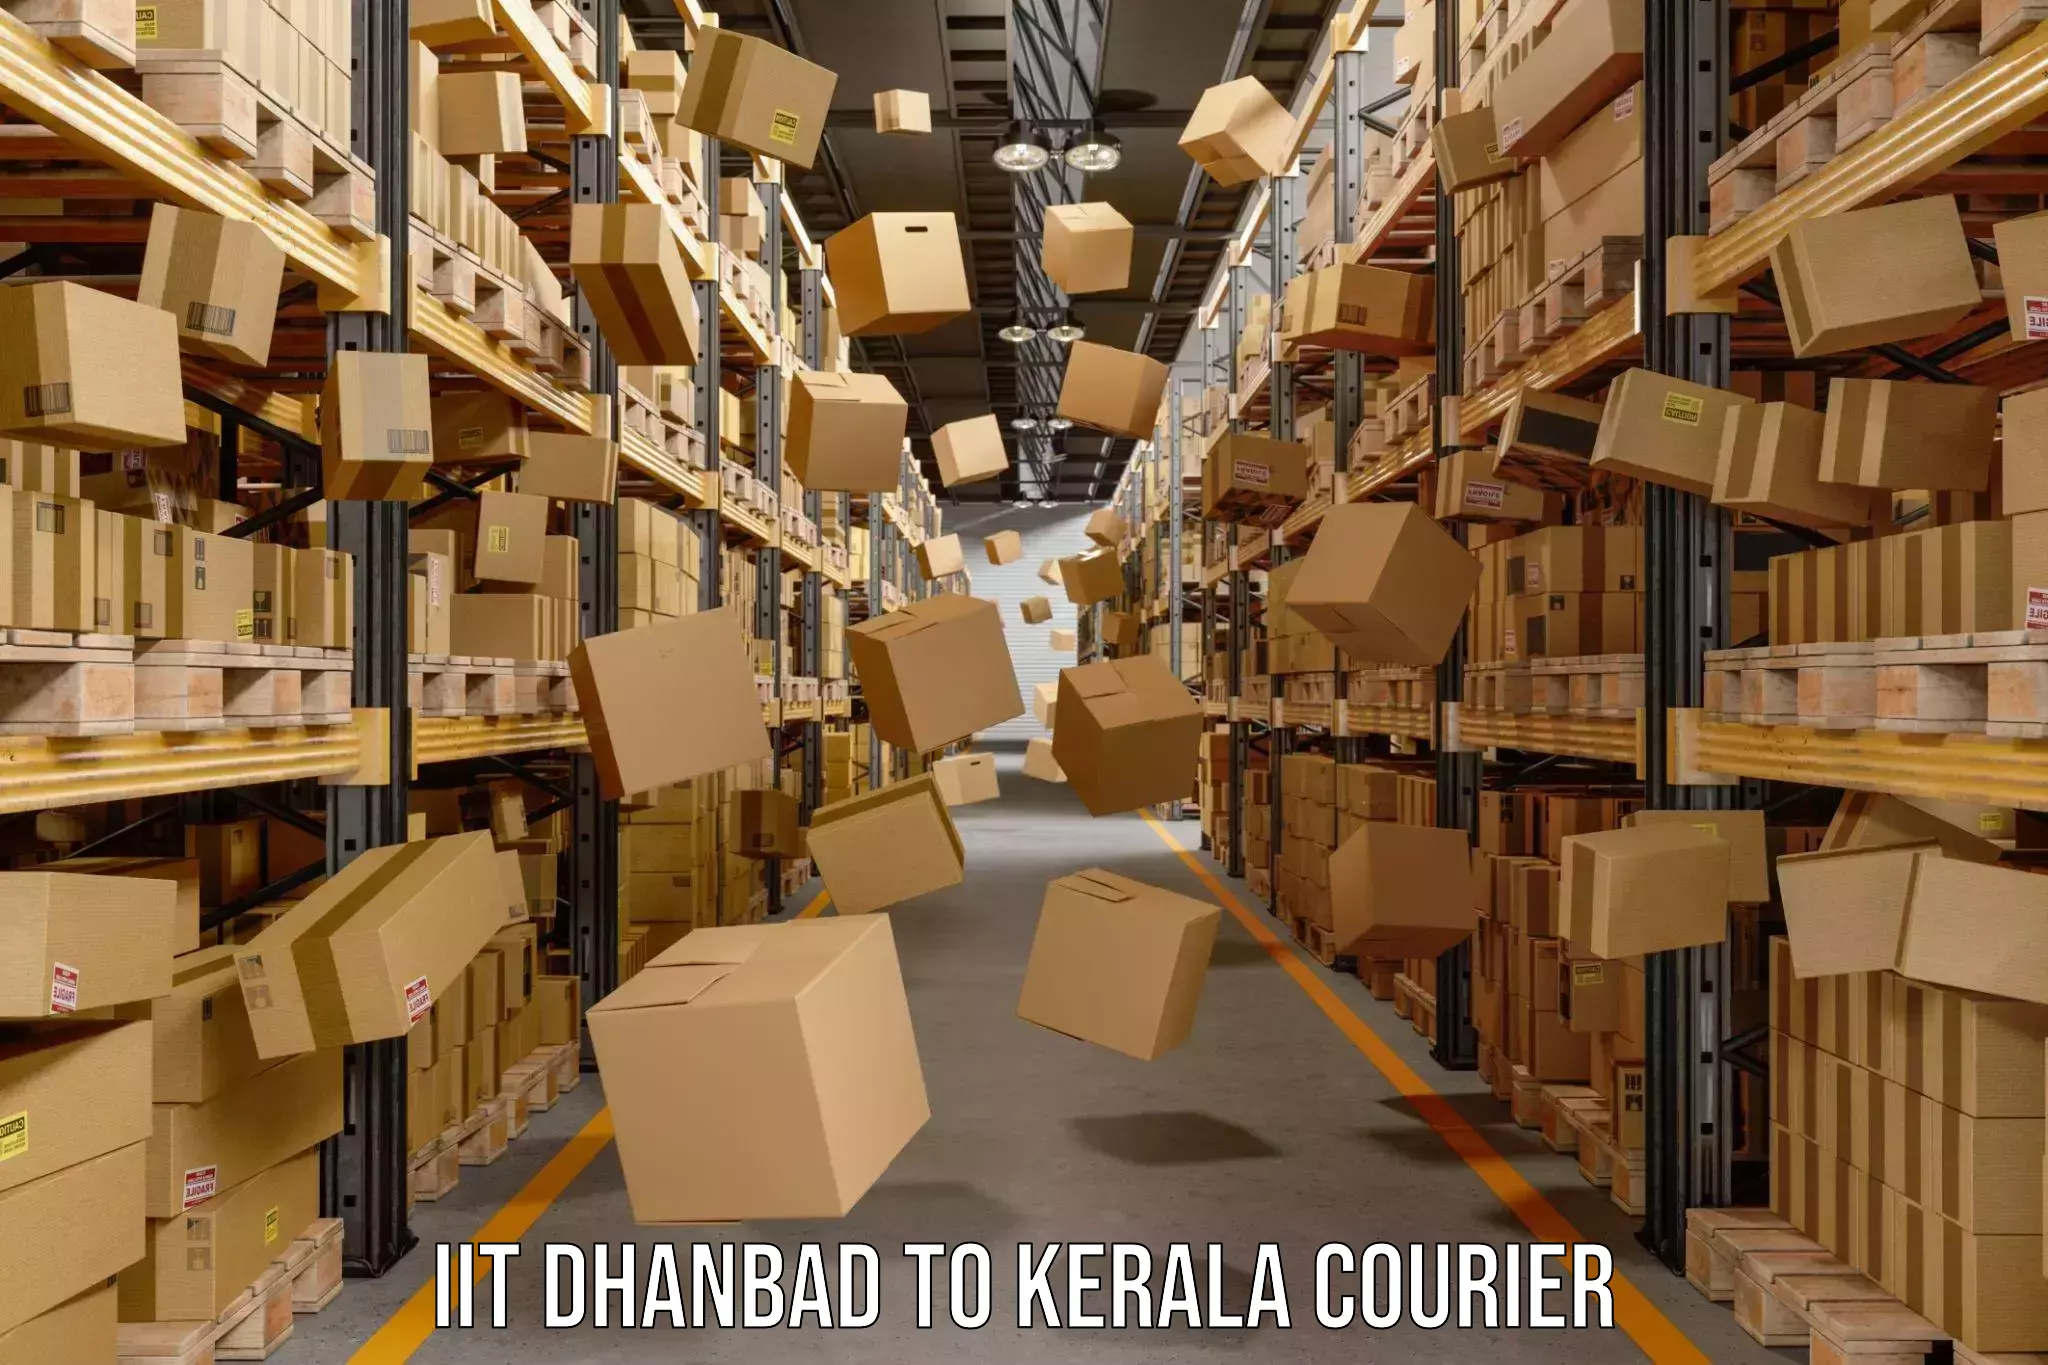 Multi-national courier services IIT Dhanbad to Kerala